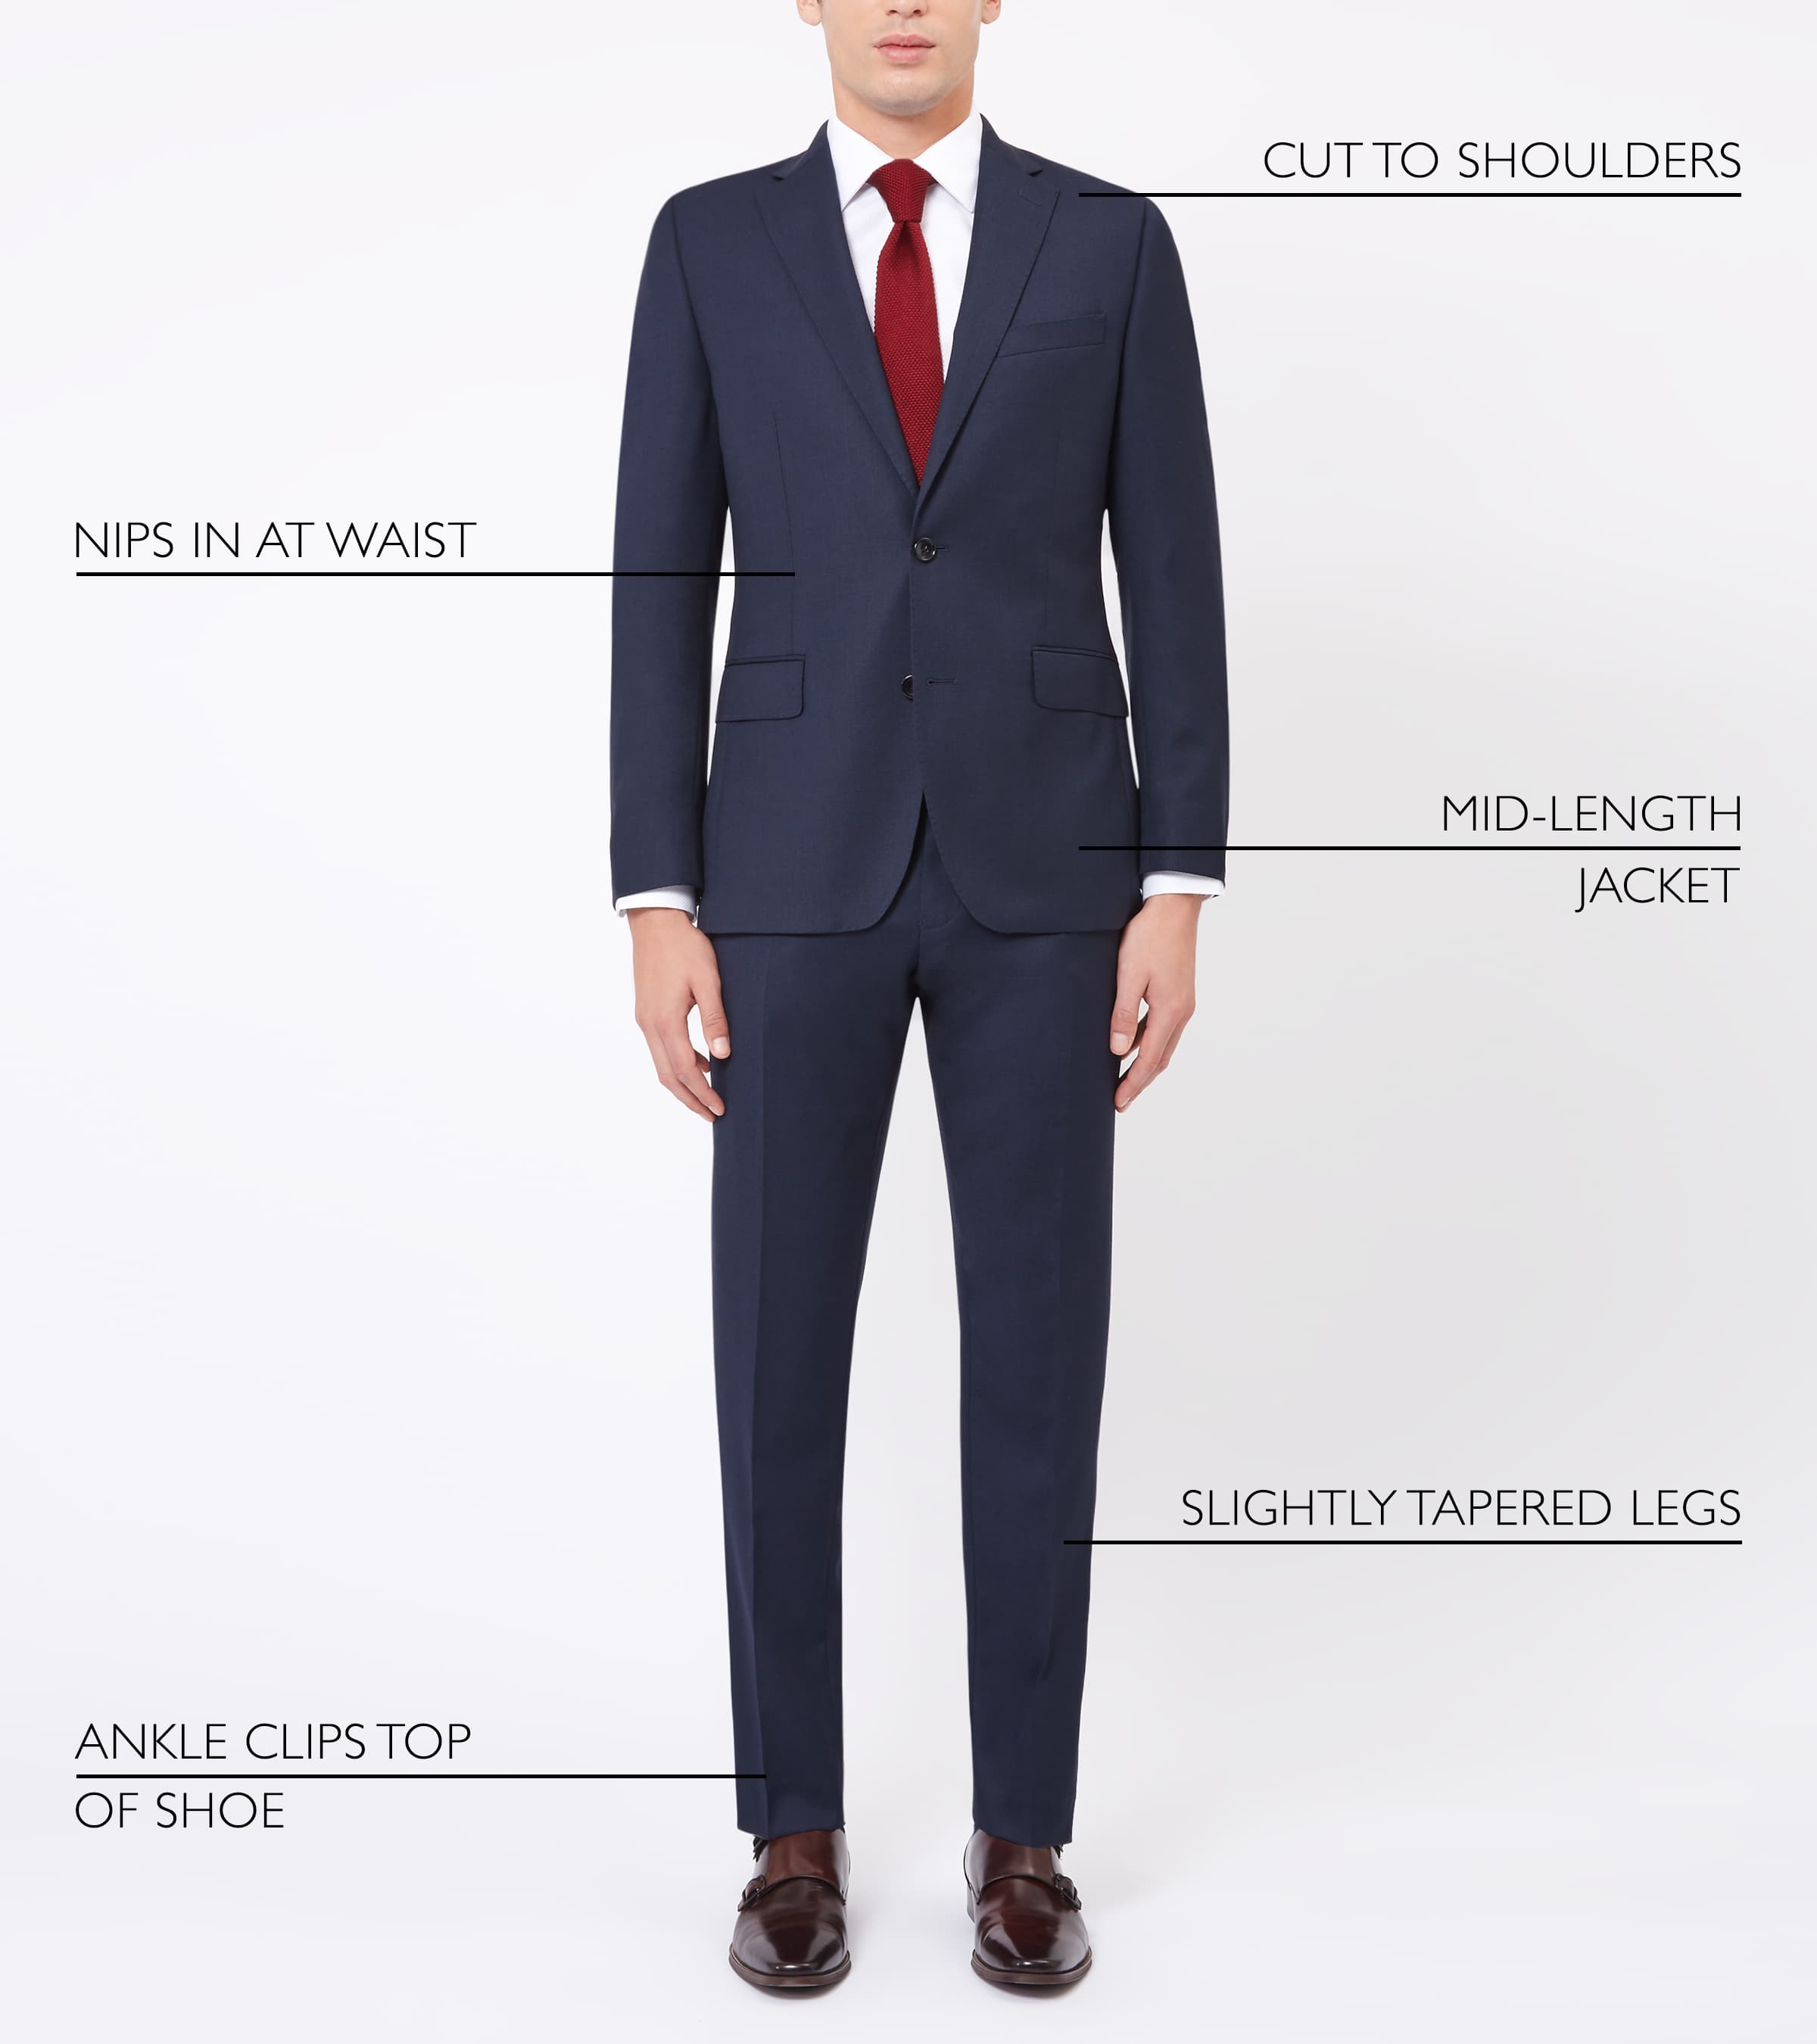 Suits in size 50: high quality for unparalleled comfort